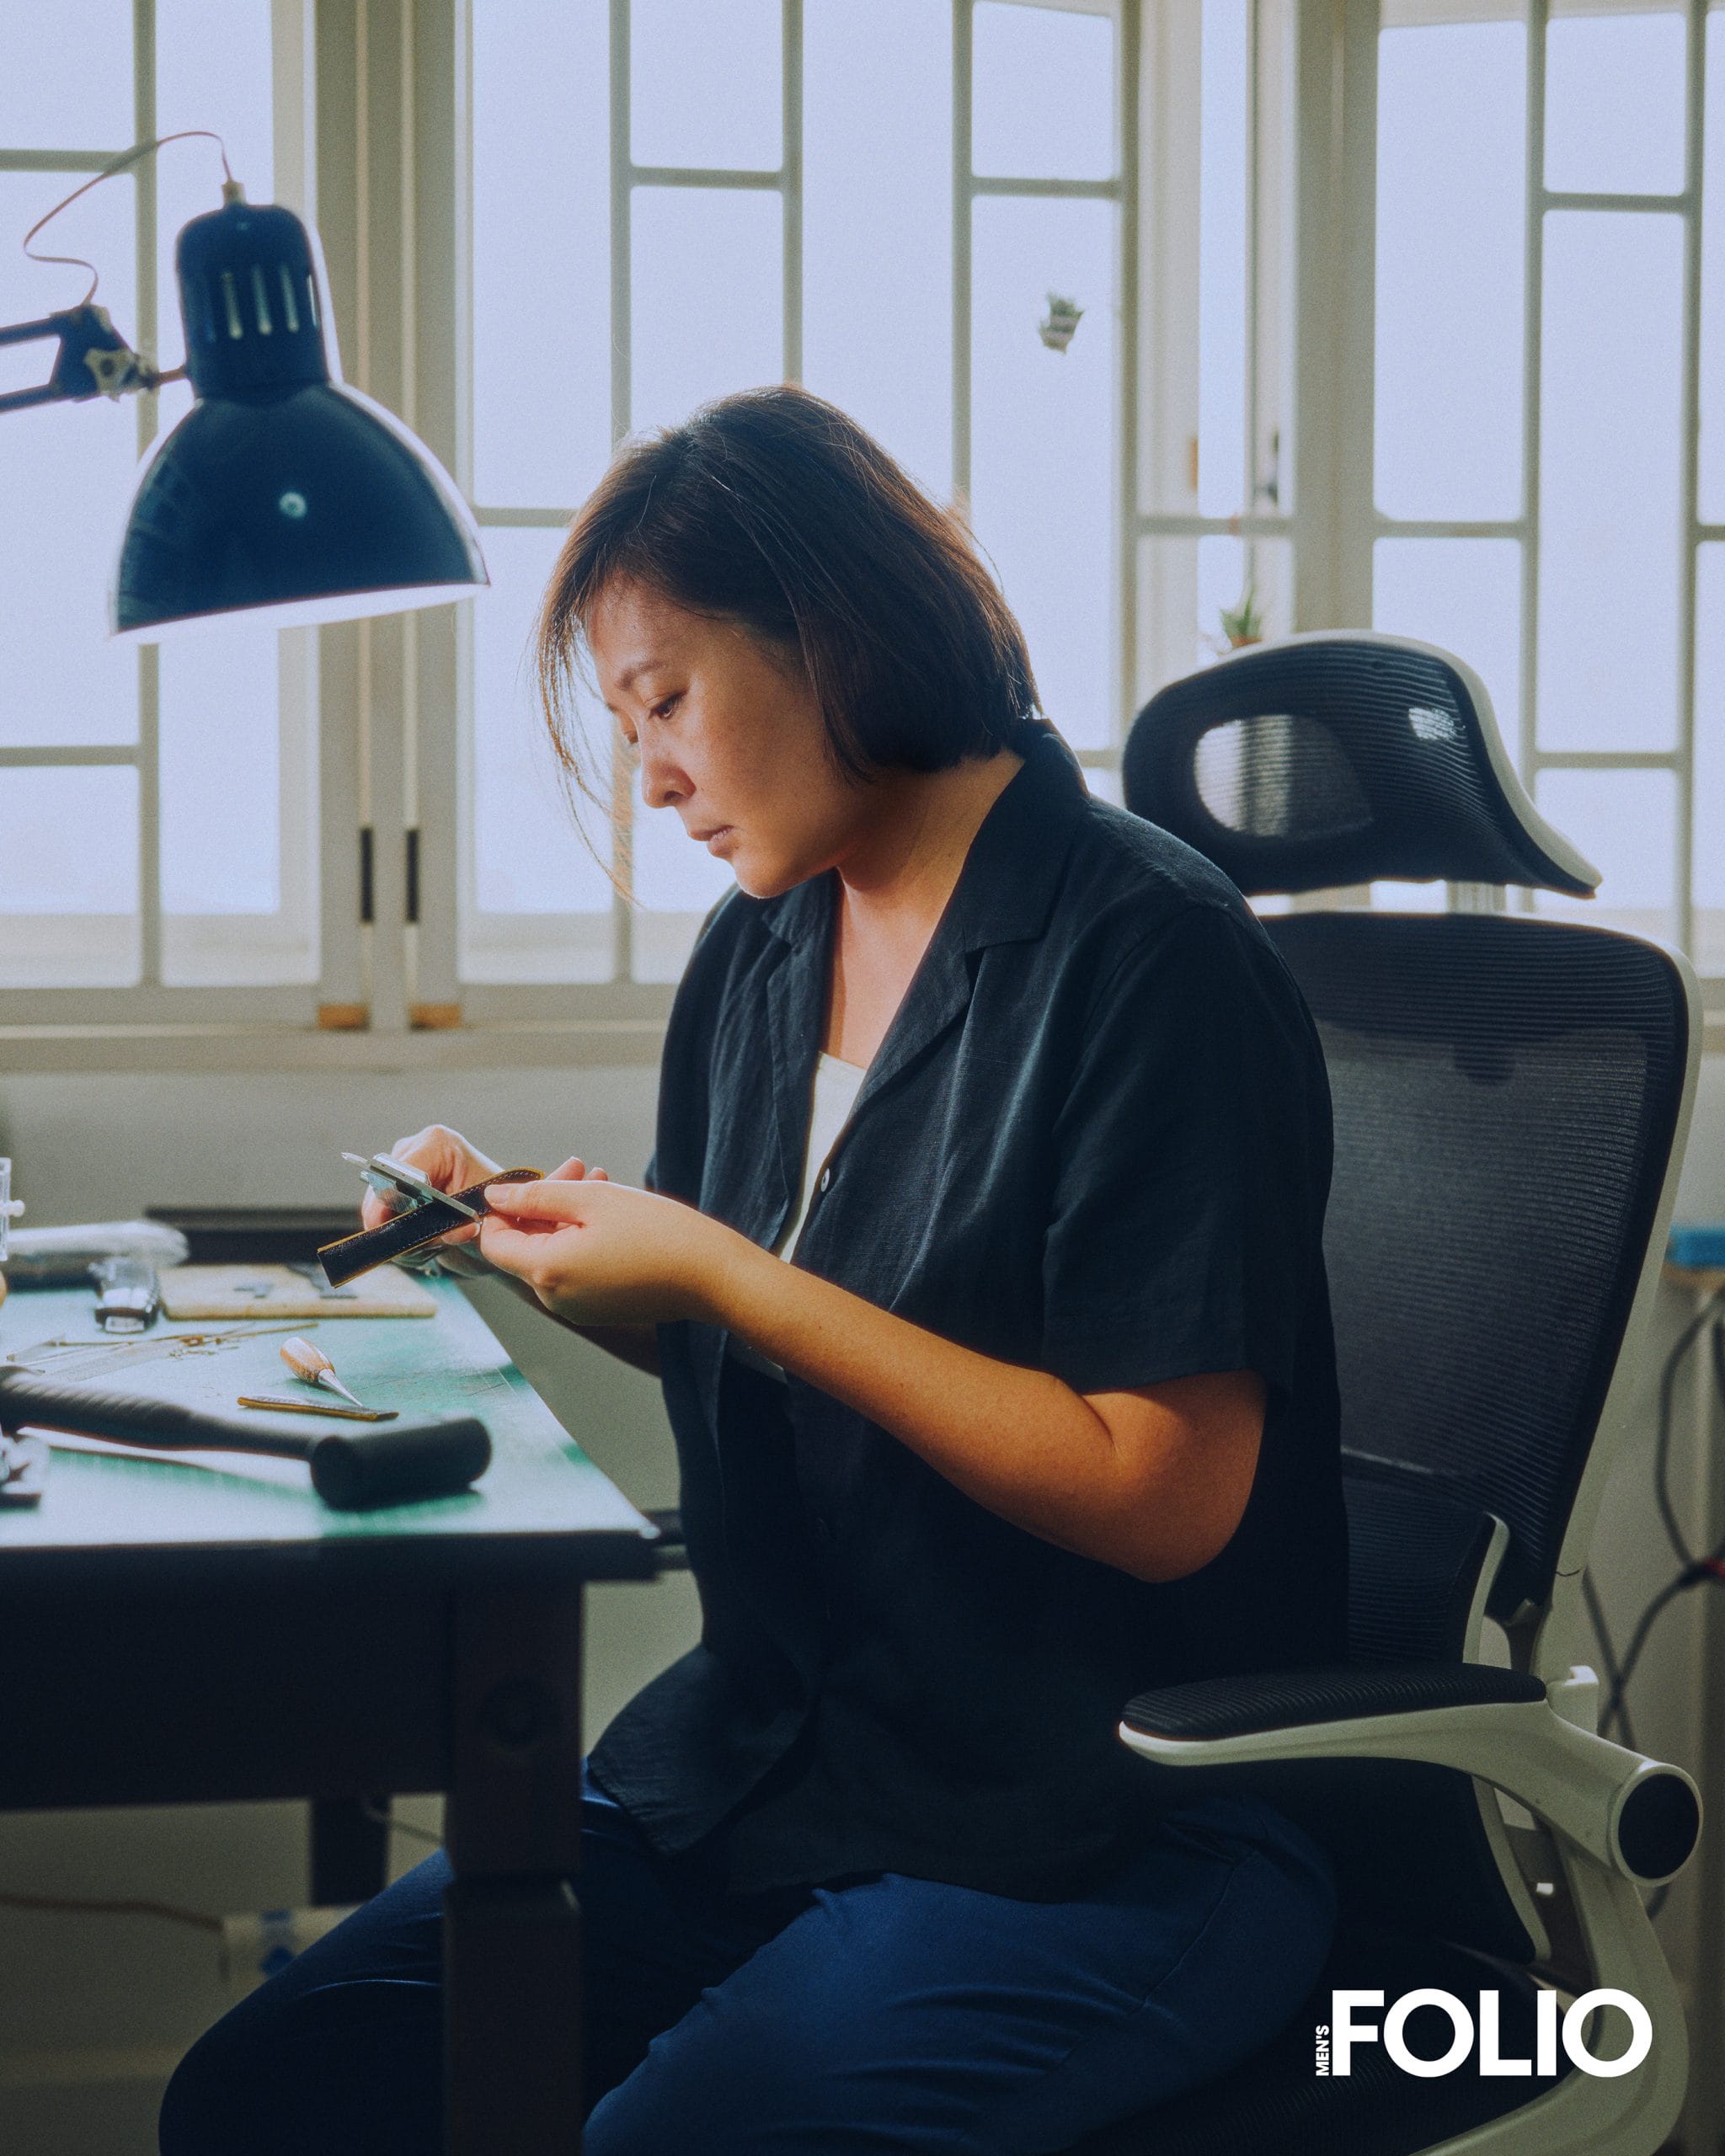 Stitch by Stich: Ng Shu Yi, Founder of Yi Leather, Shares the Journey of Her Business as It Enters Its Tenth Year